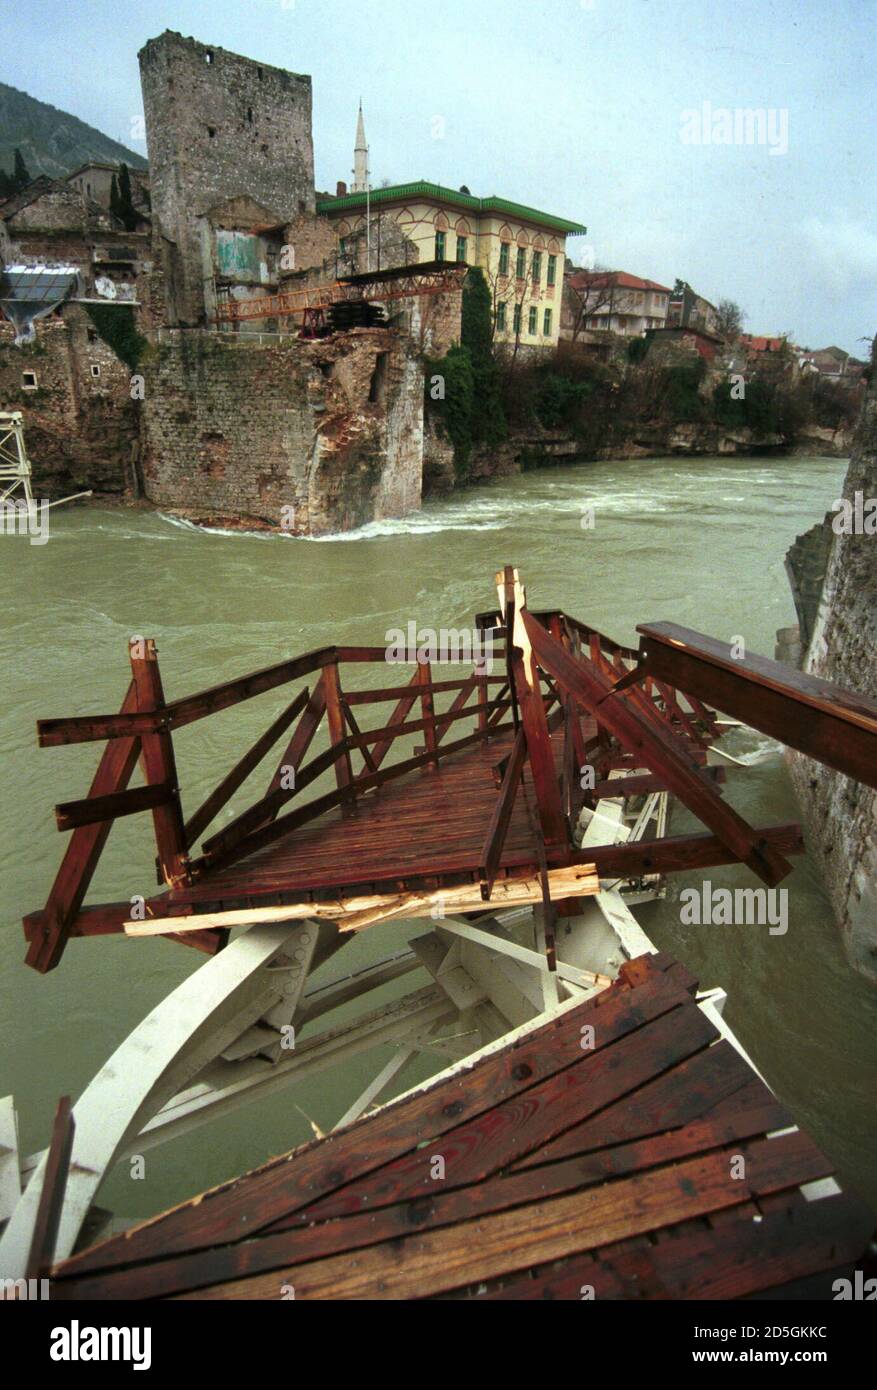 An impromised bridge over the Neretva River lies destroyed in the strongly flowing flooded river in Mostar December 17. The bridge was built to replace the old historical bridge destroyed during the Croat-Moslem war along with 45 flats and 10 private houses in the centre of Mostar of this historic city.  MB/WS Stock Photo